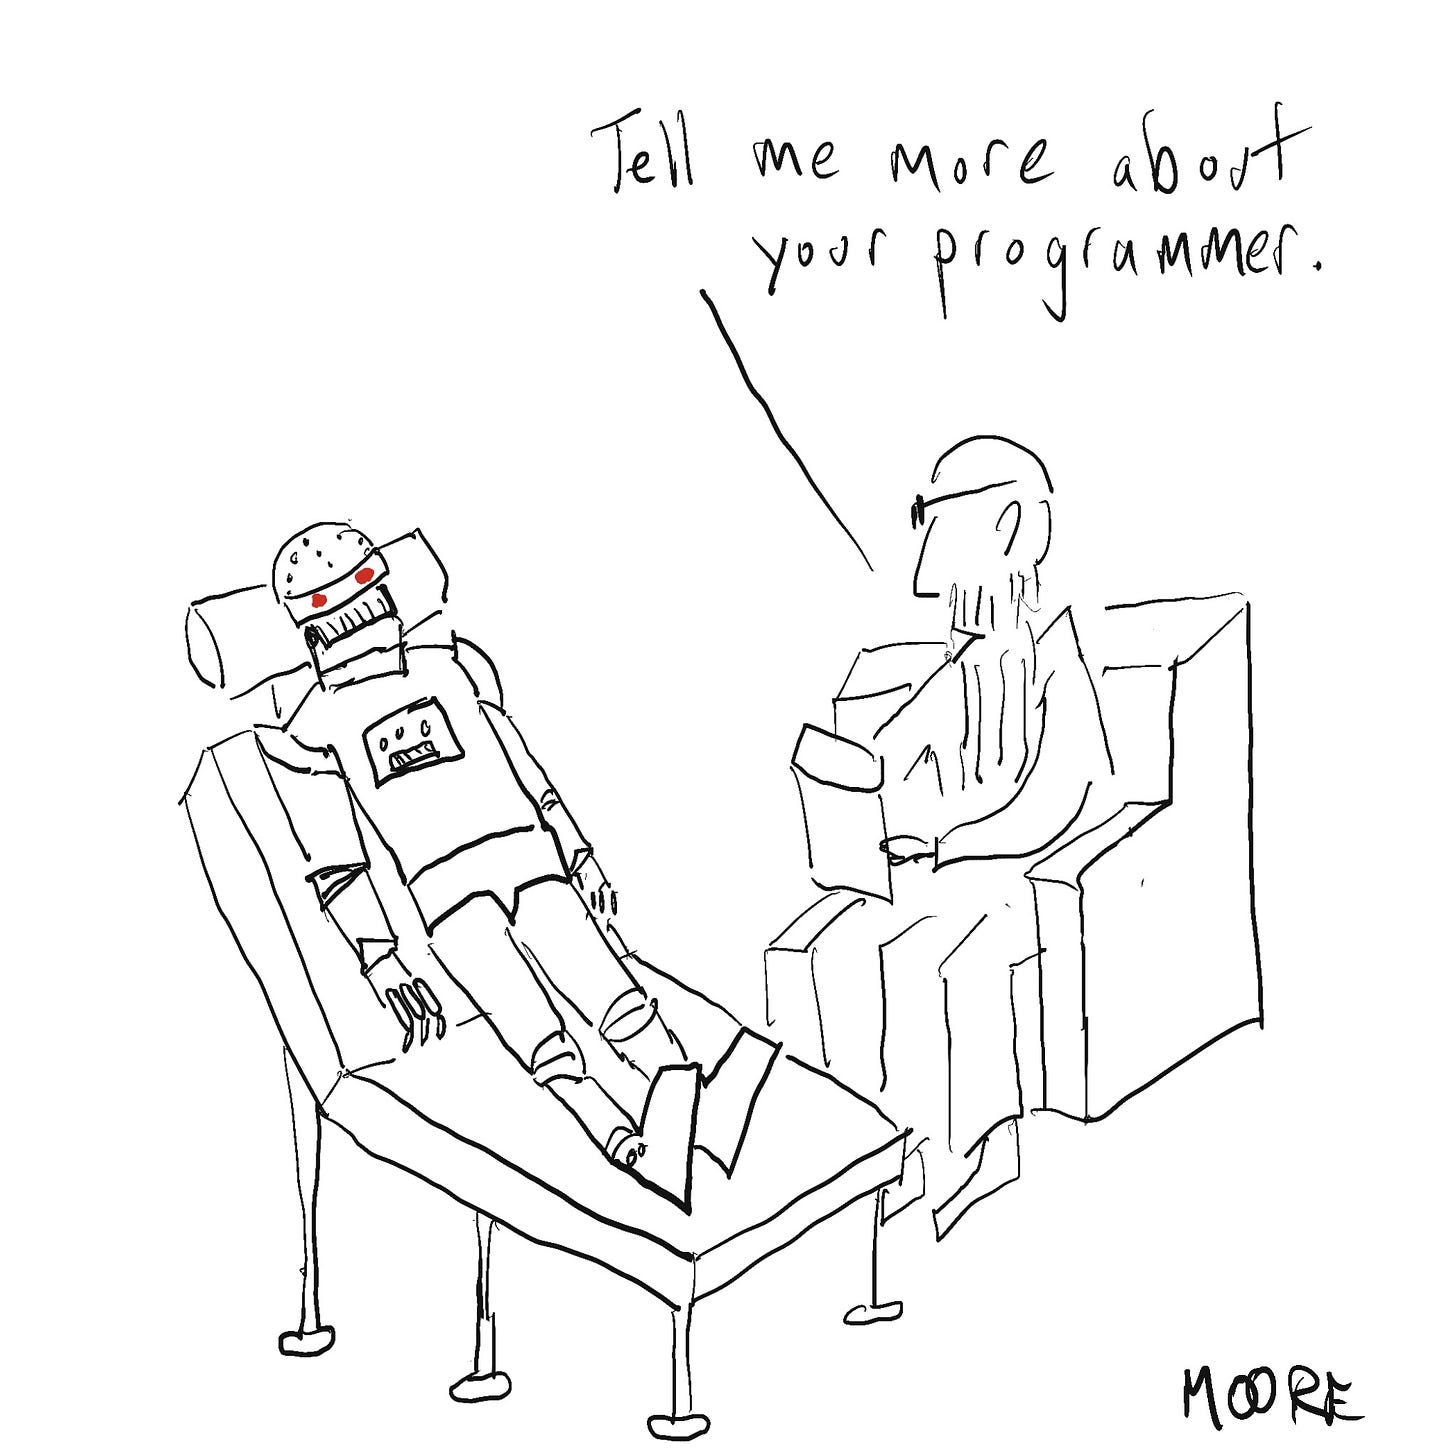 Robot on psychiatrist's couch